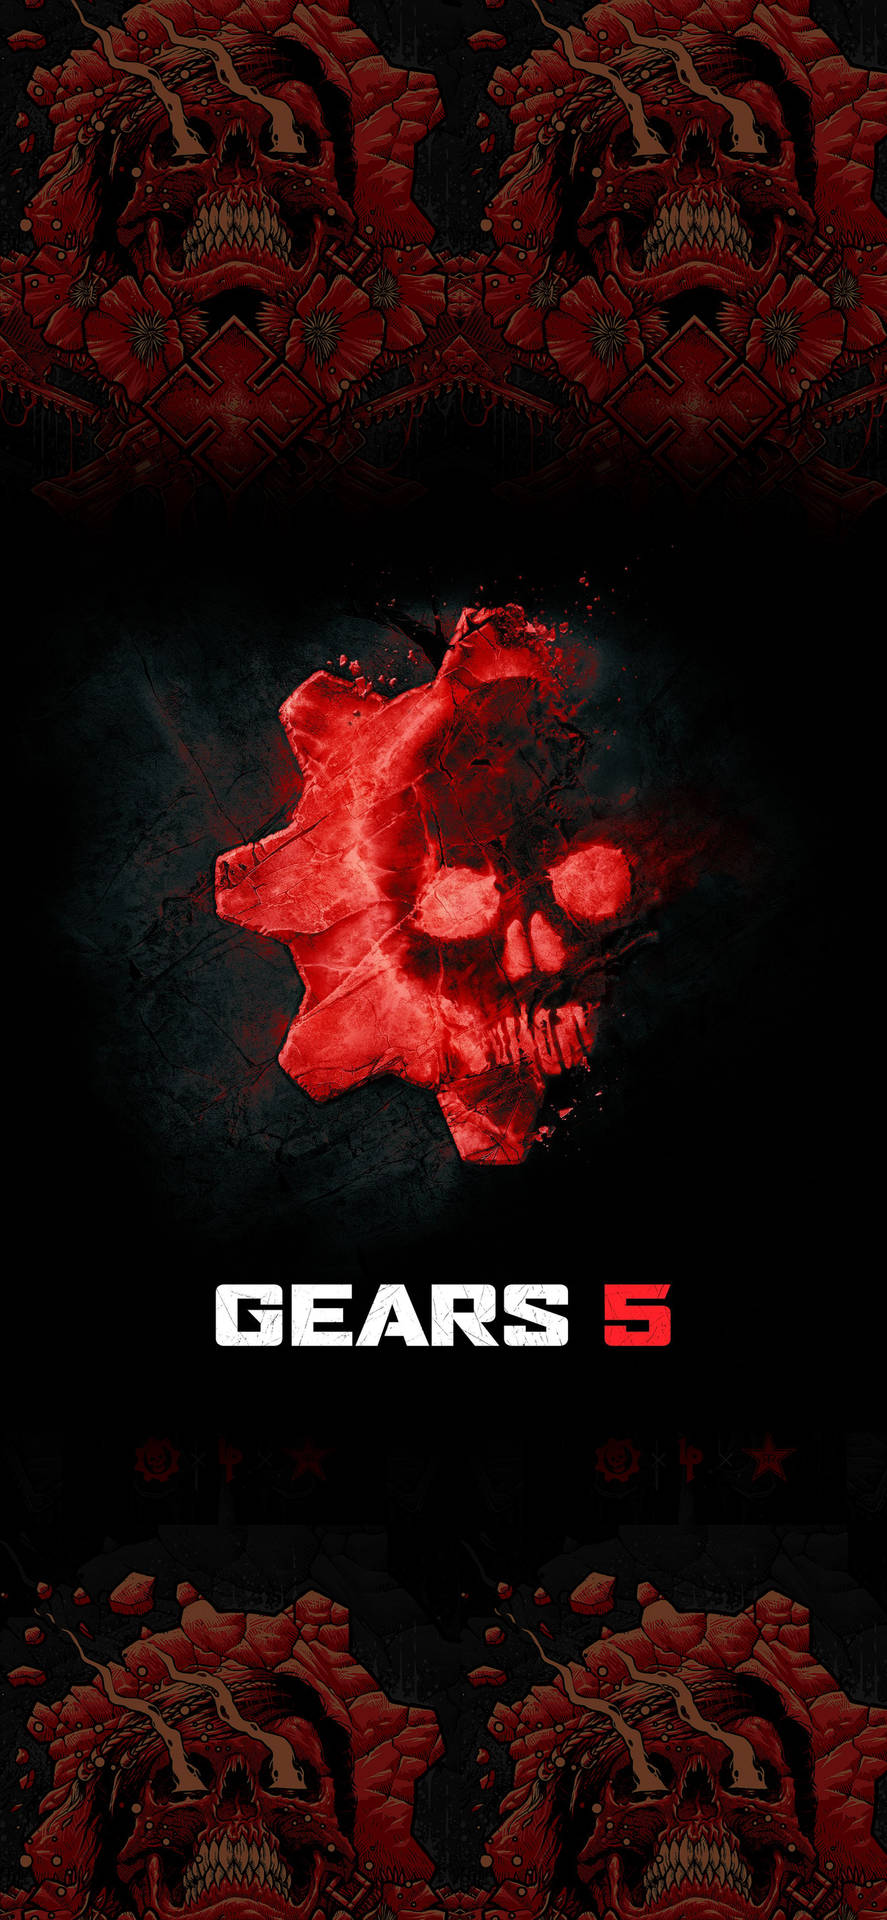 Cog And Skull On Fire Gears 5 Iphone